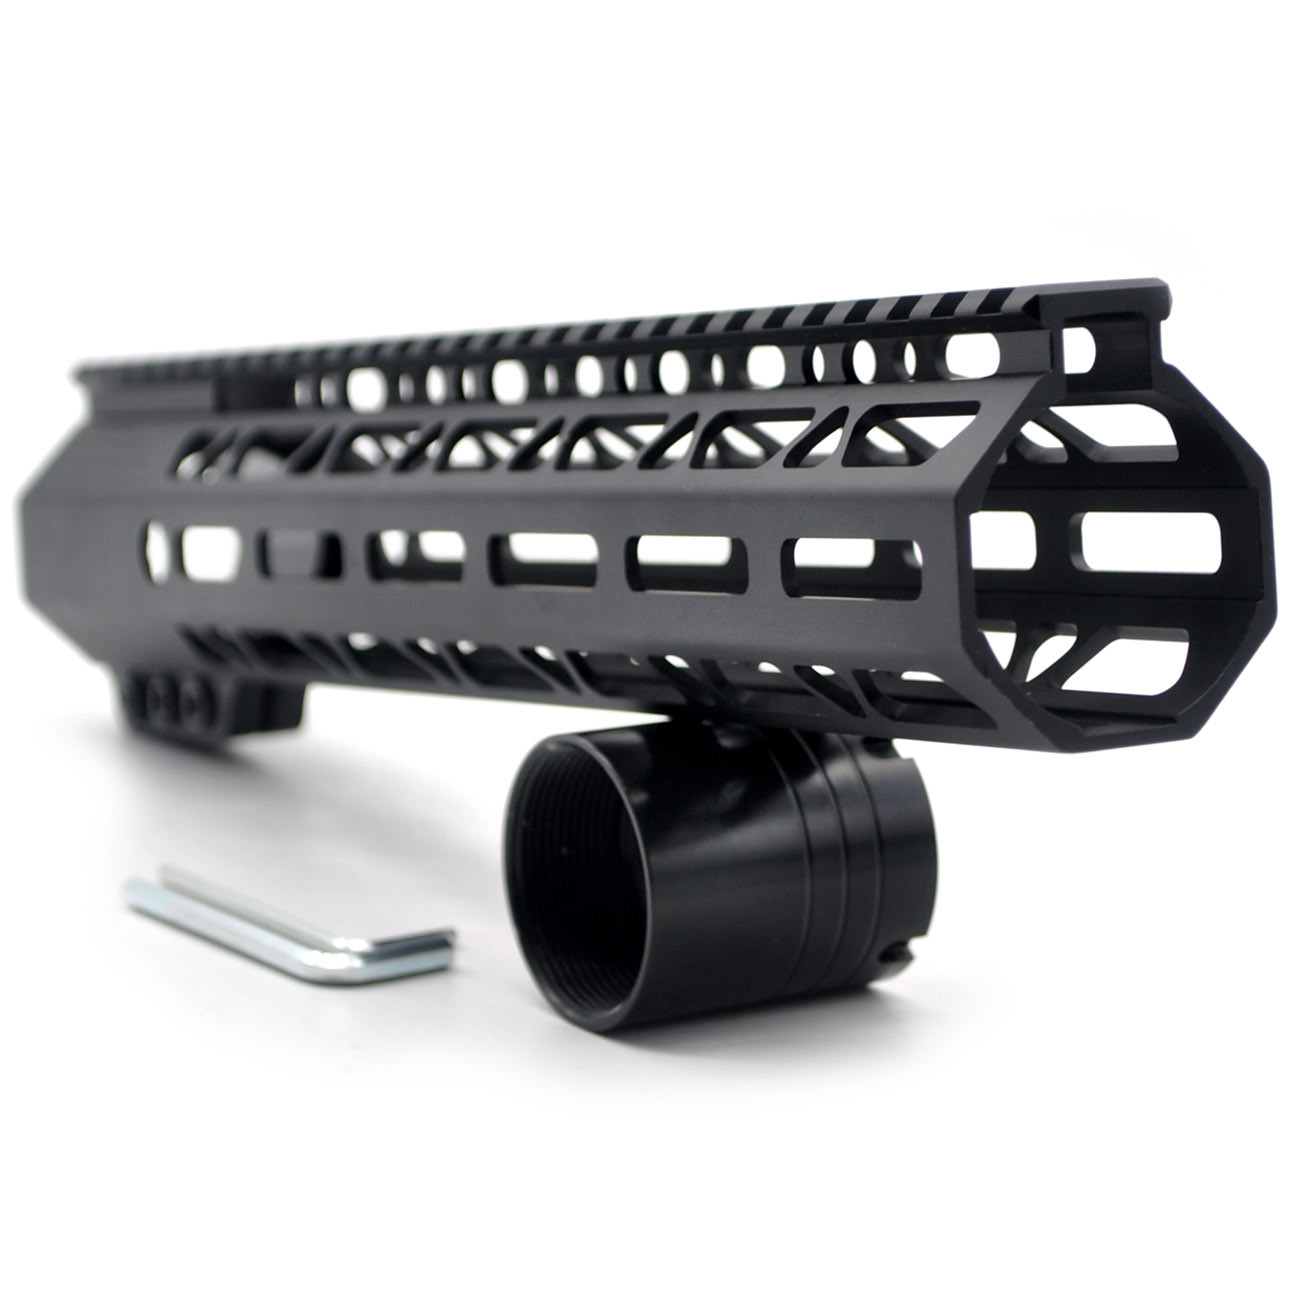 New Clamp Style Low profile Black 12 inches .308/7.62 LR_308 DPMS M-LOK ...